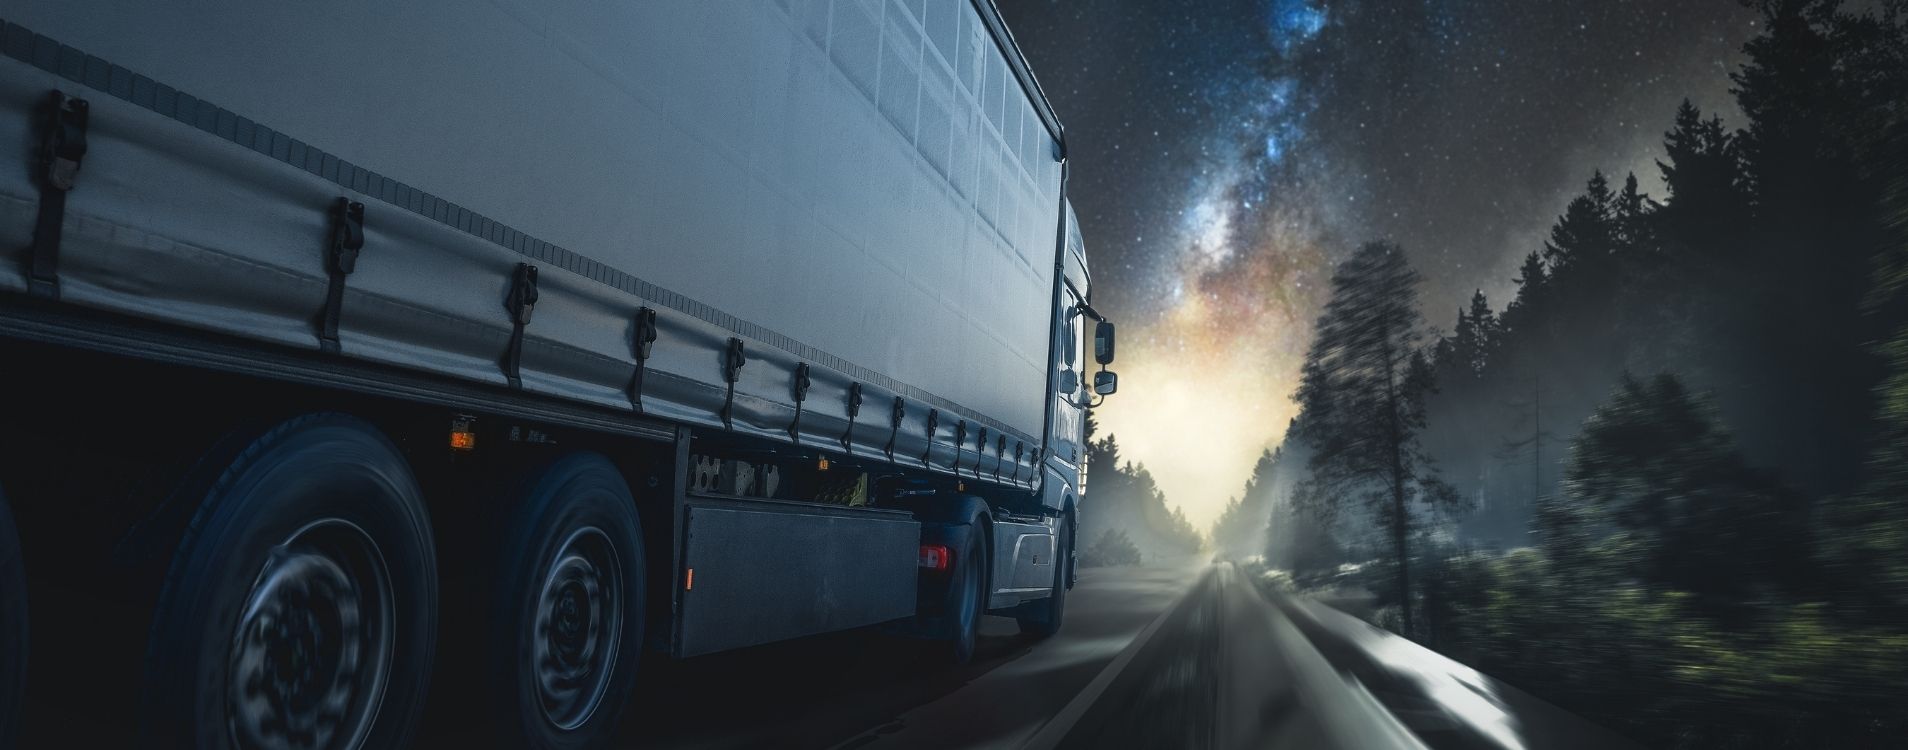 Truck Load Rates In 2022 And How To Use Them